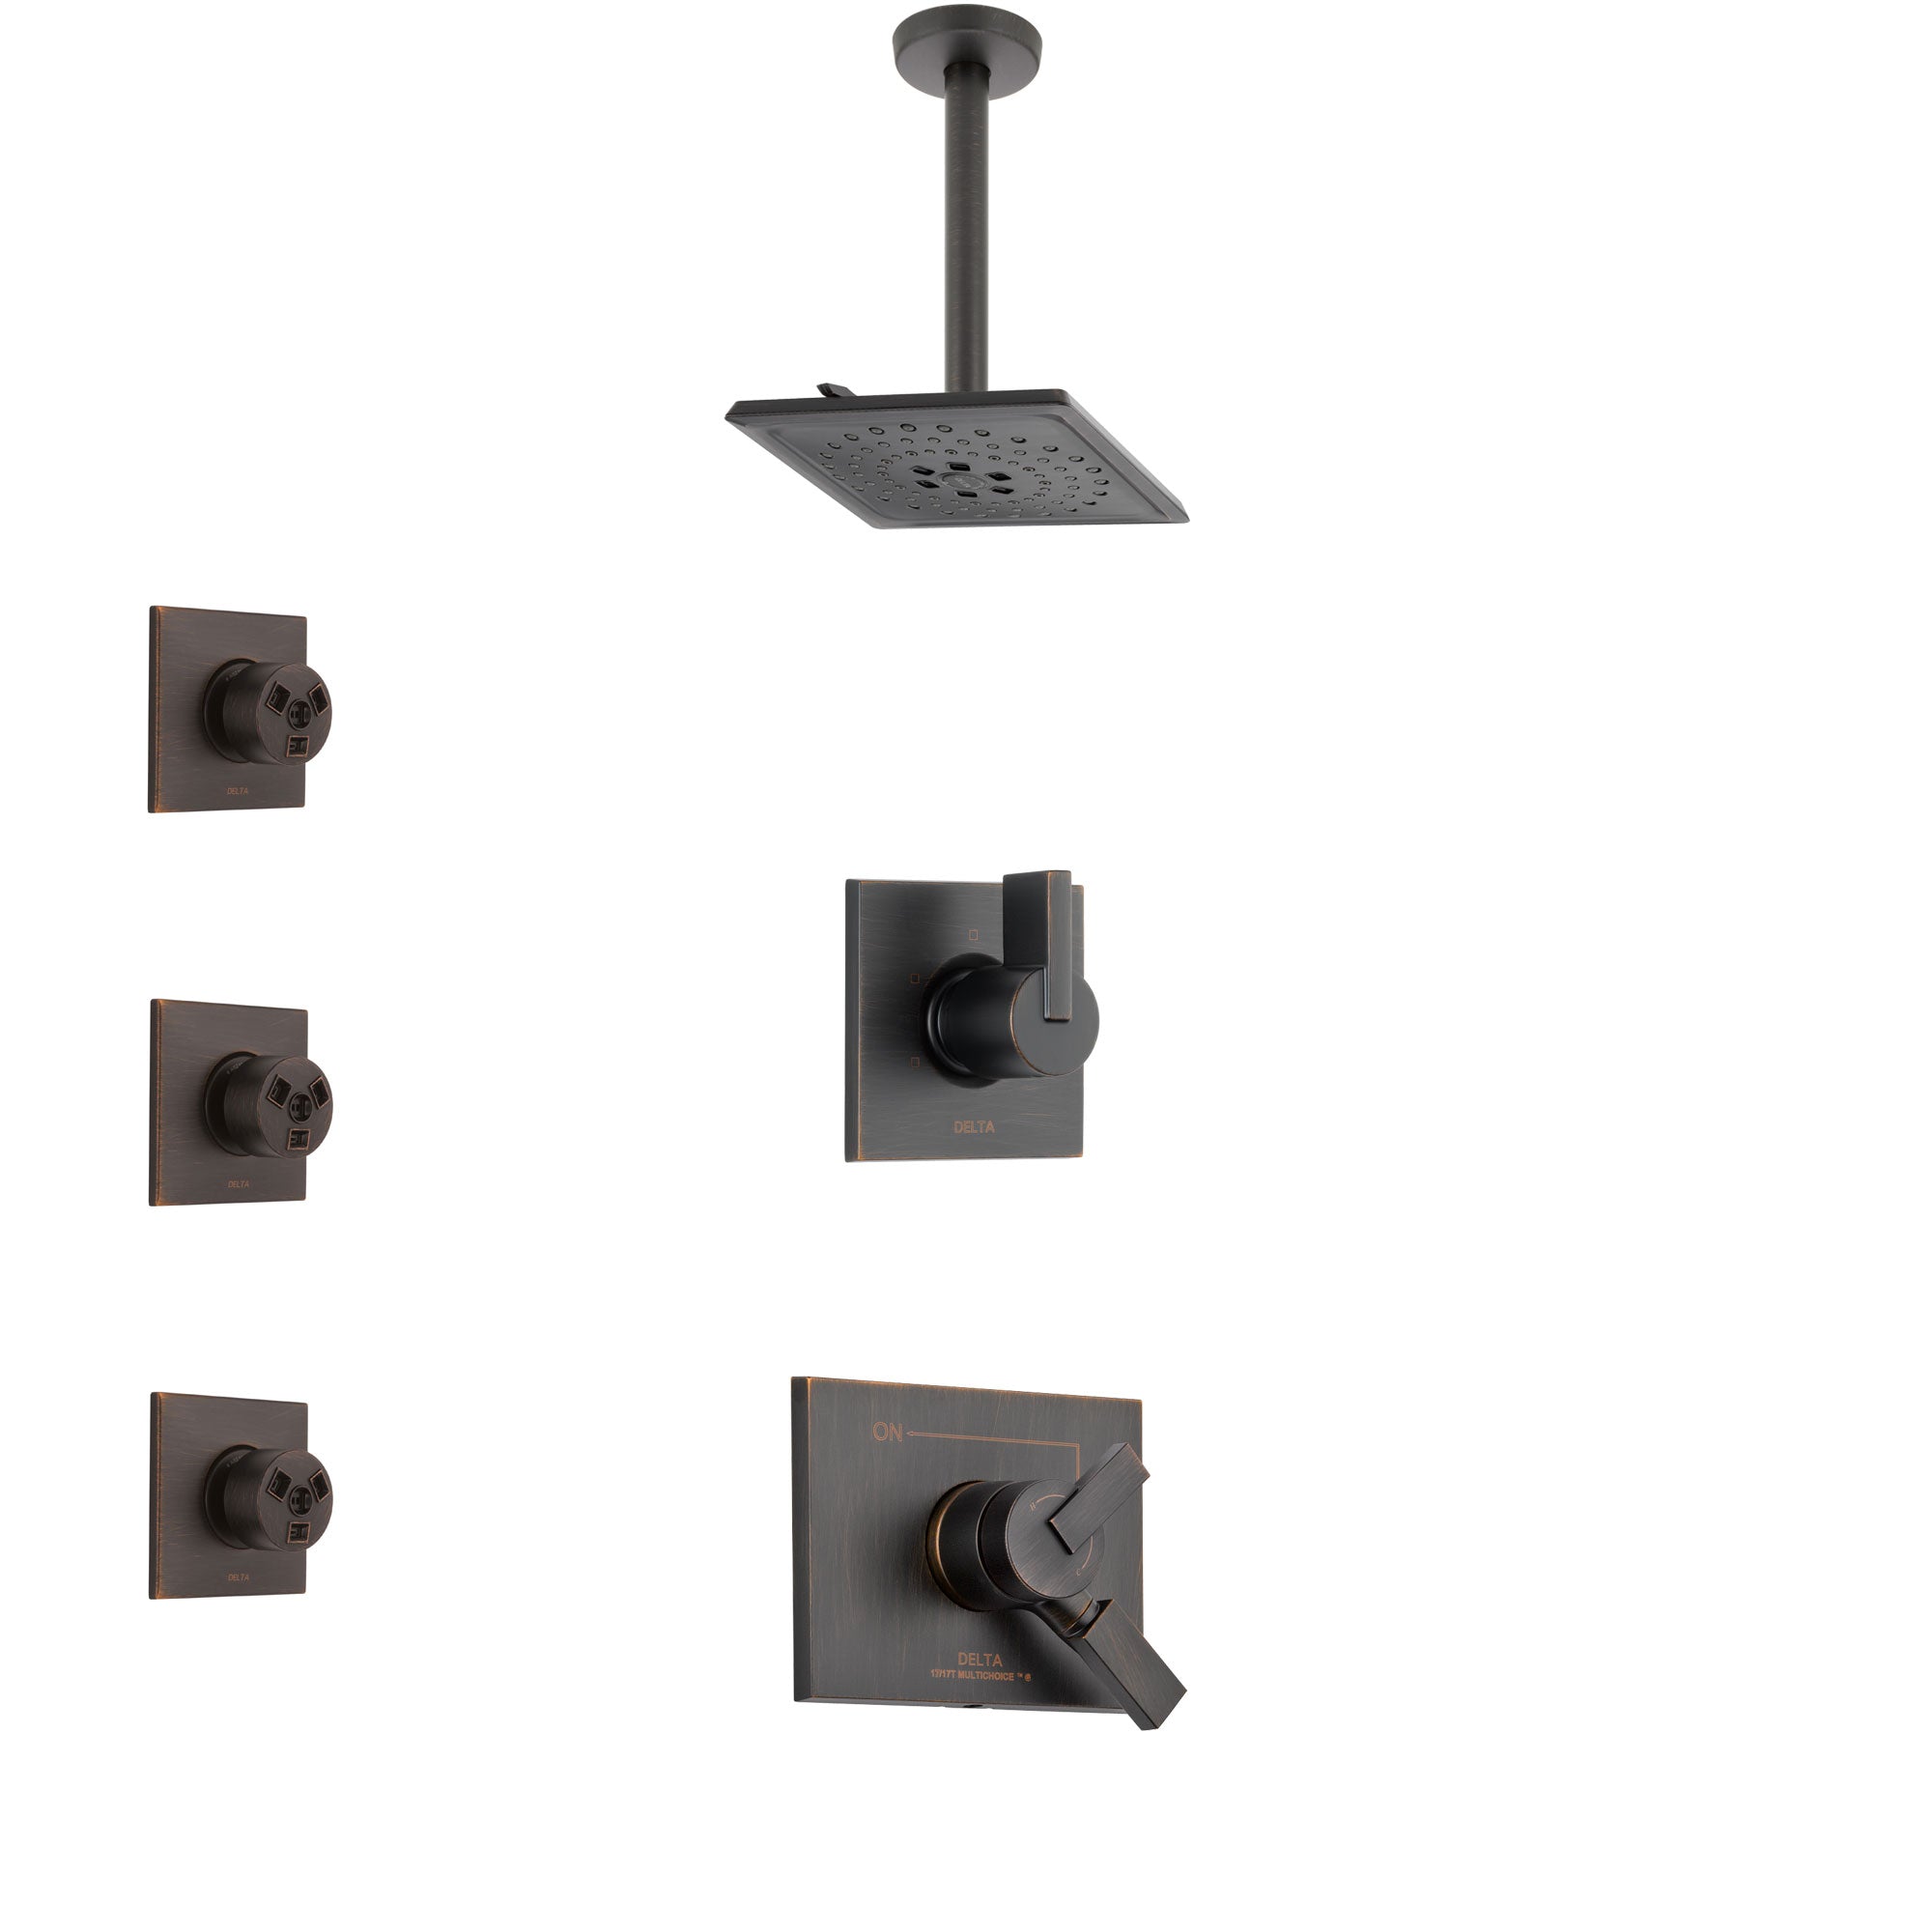 Delta Vero Venetian Bronze Finish Shower System with Dual Control Handle, 3-Setting Diverter, Ceiling Mount Showerhead, and 3 Body Sprays SS1753RB7